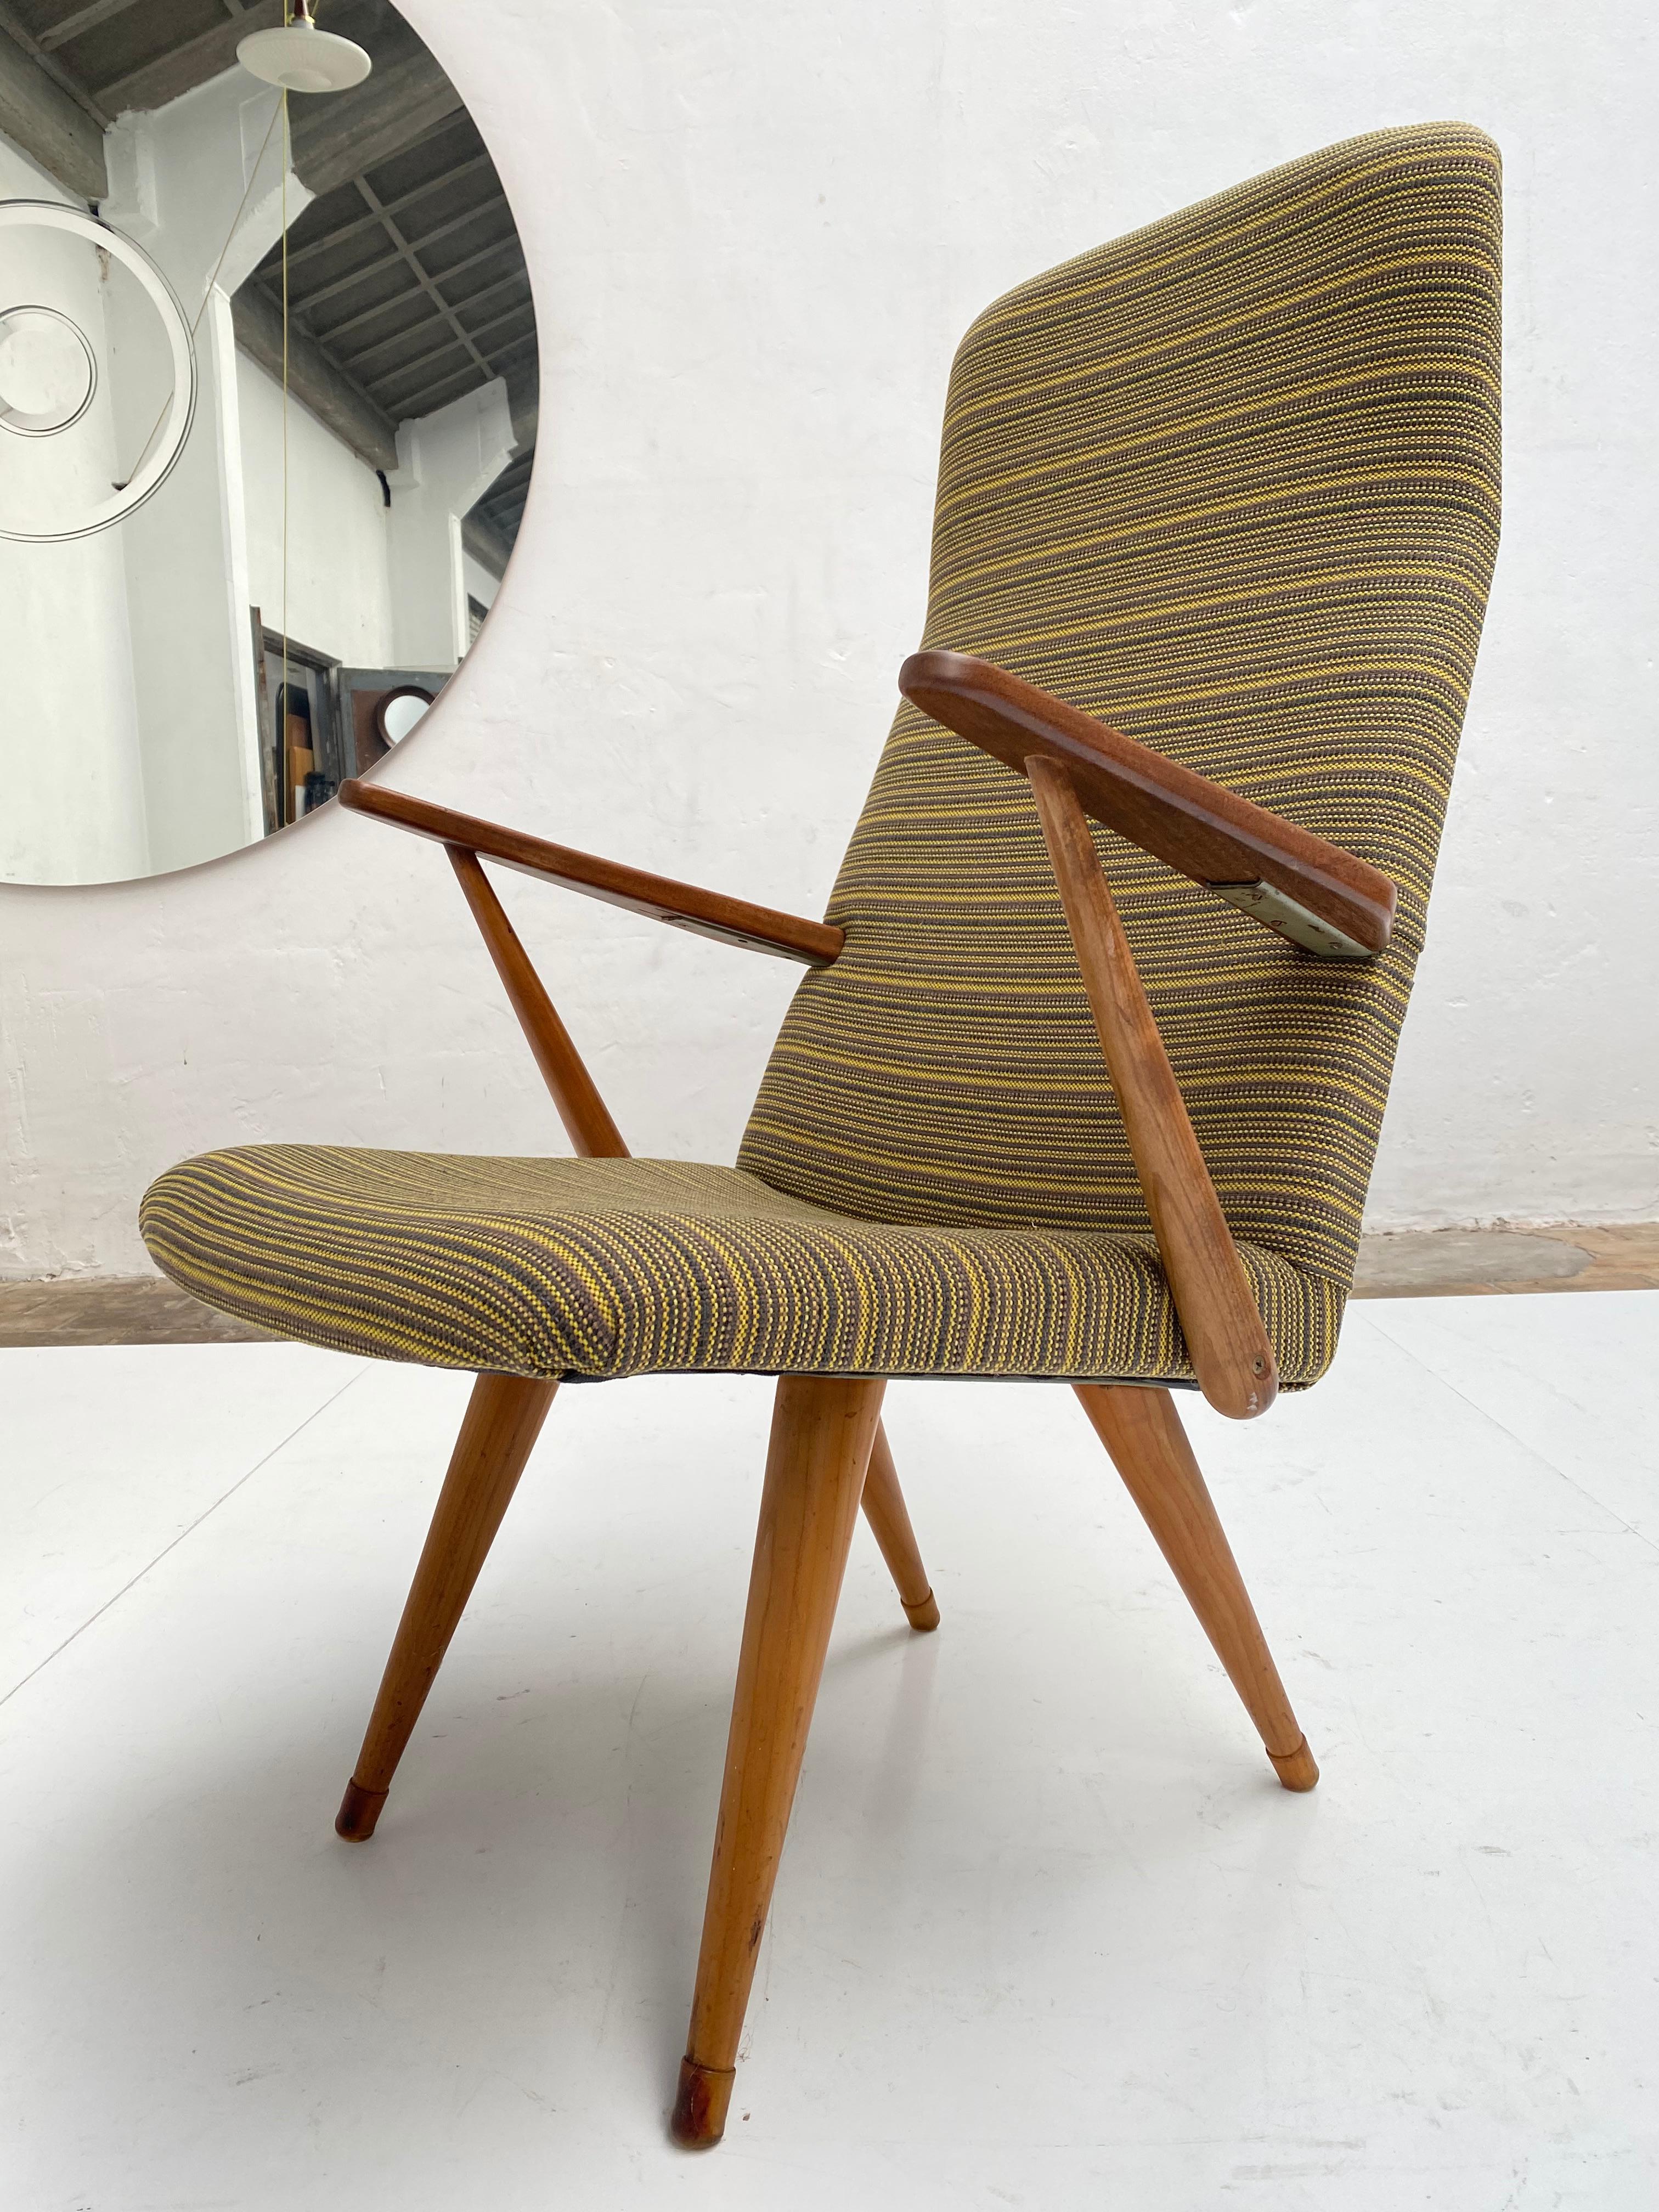 Lounge chair by Swedish manufacturer Akerblom.

Solid Birch legs and arms with steel frame

New upholstered in a De Ploeg striped mustard green and yellow upholstery.